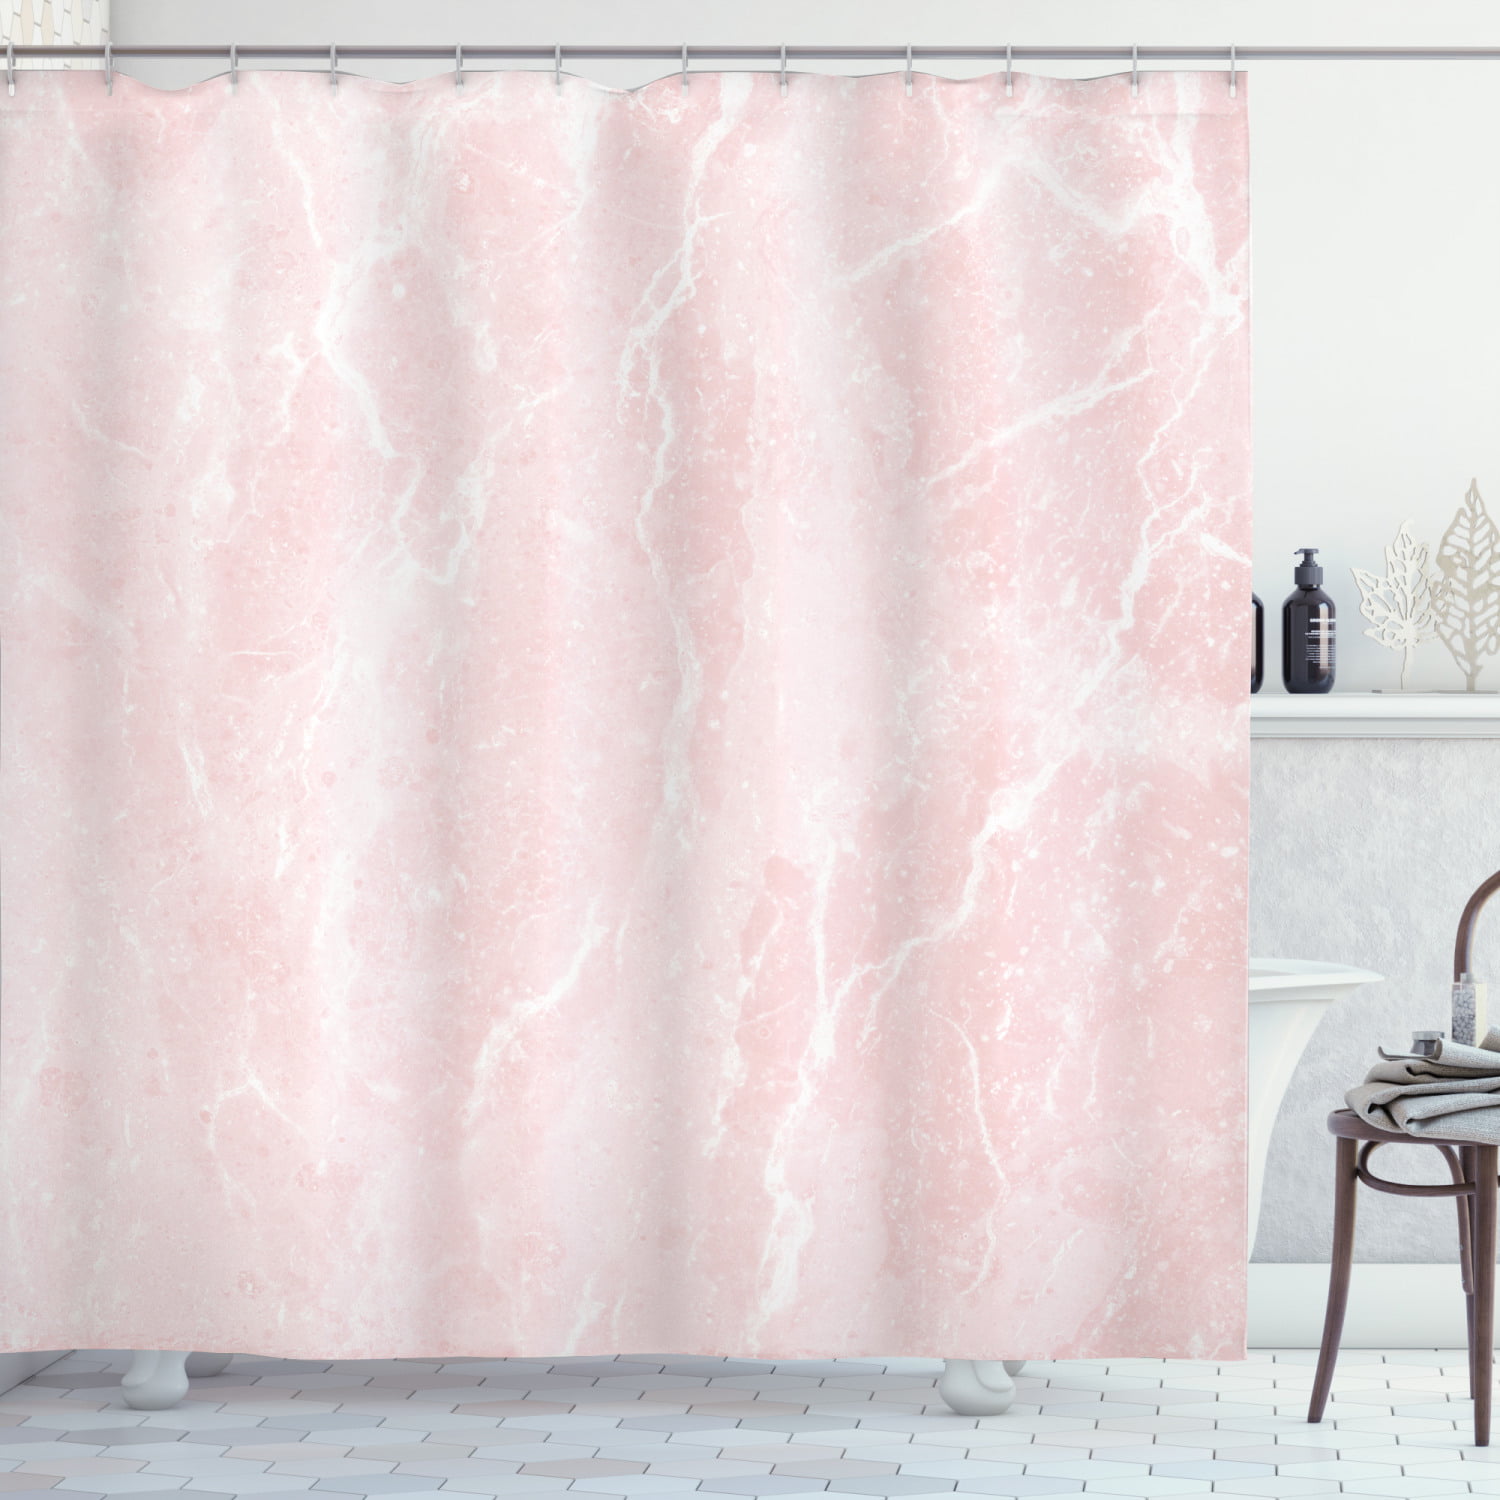 Abstract Marble Texture Shower Curtain Sets Crystal Mineral For Bathroom Decor 